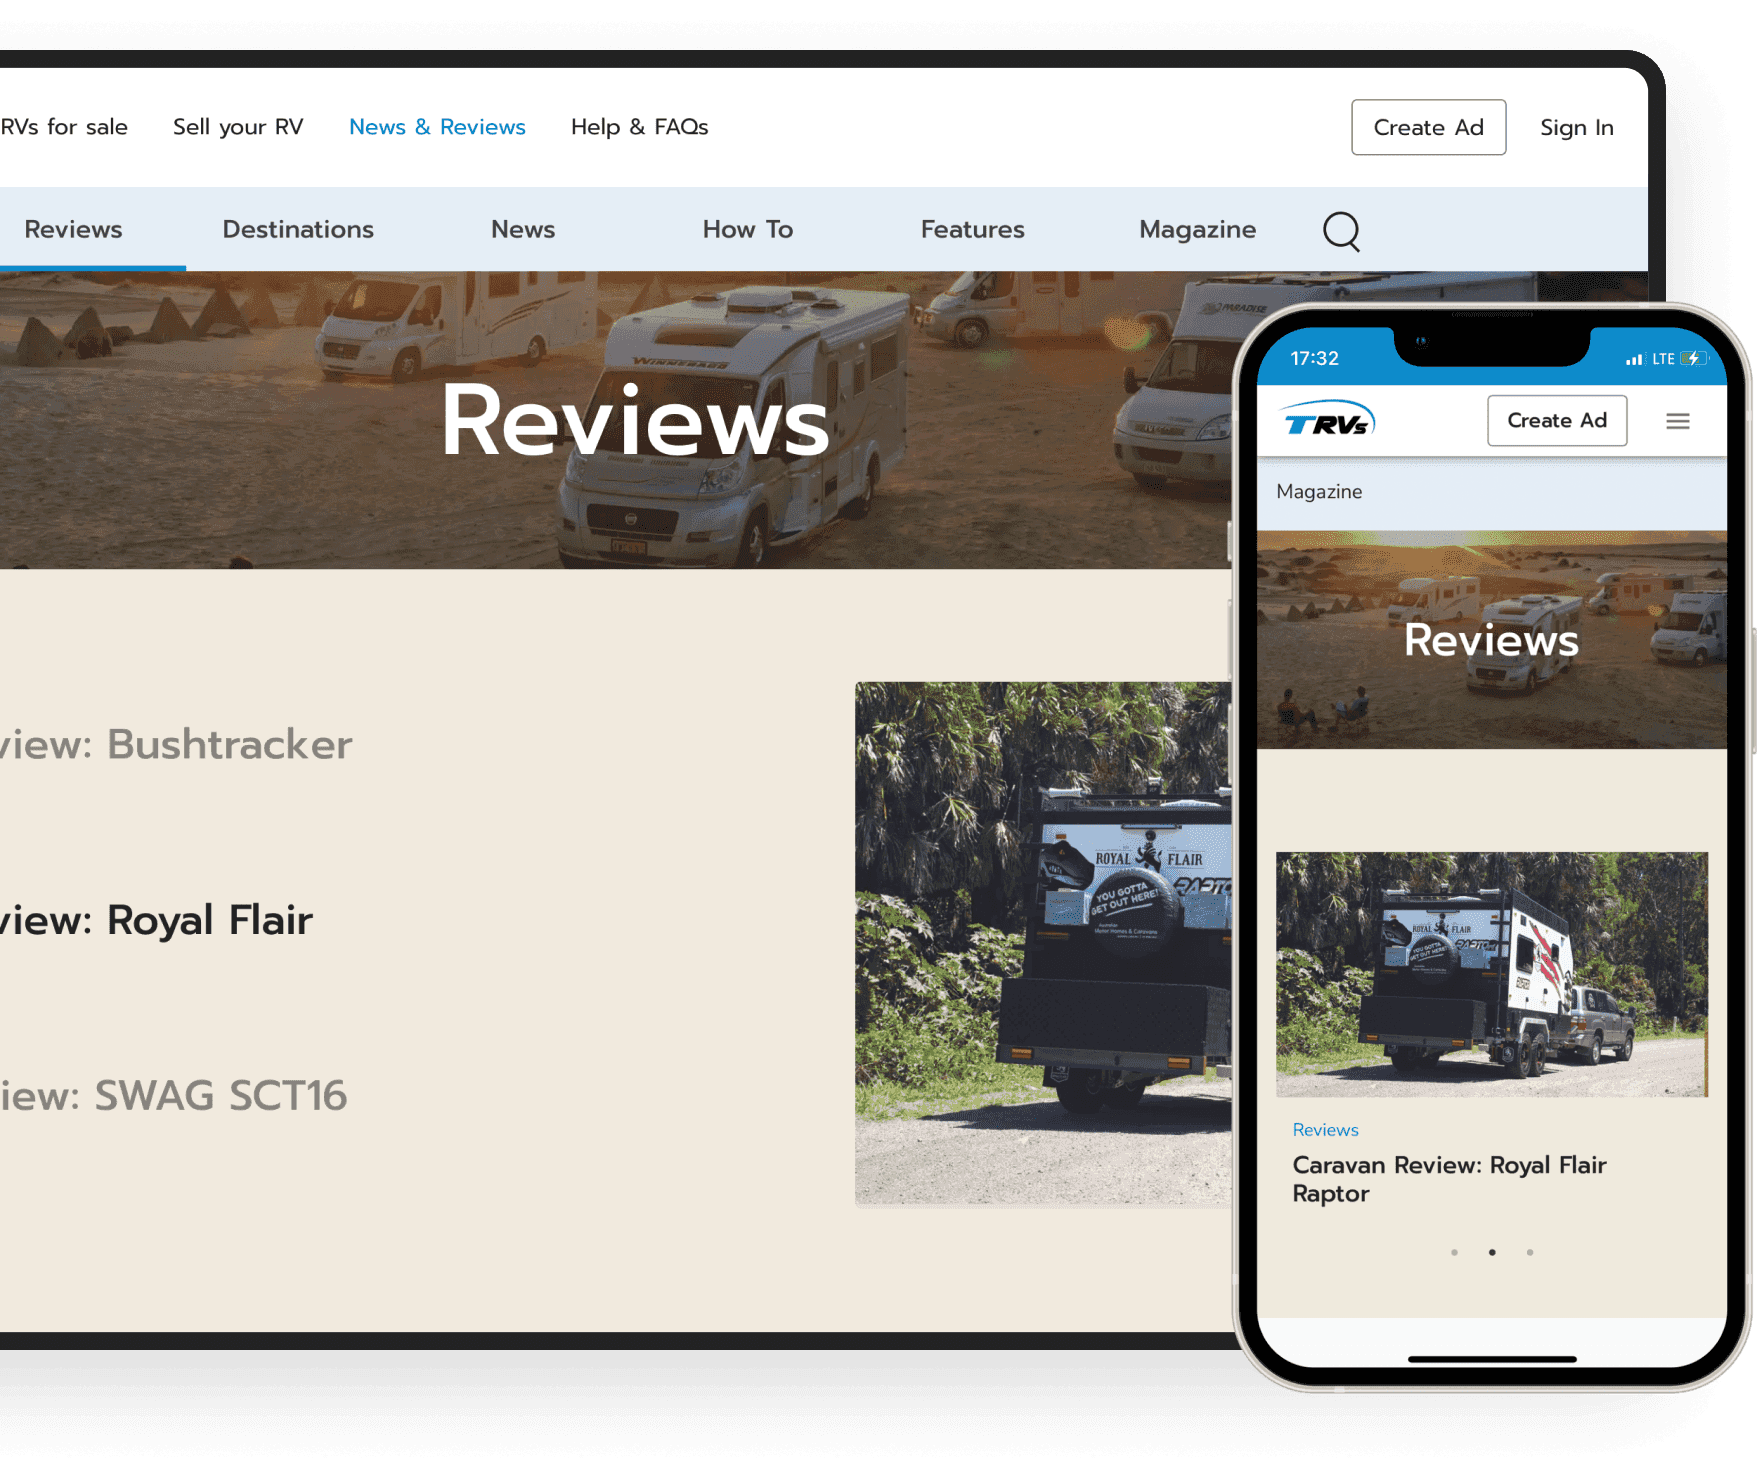 UI redesign of the online marketplace for campers